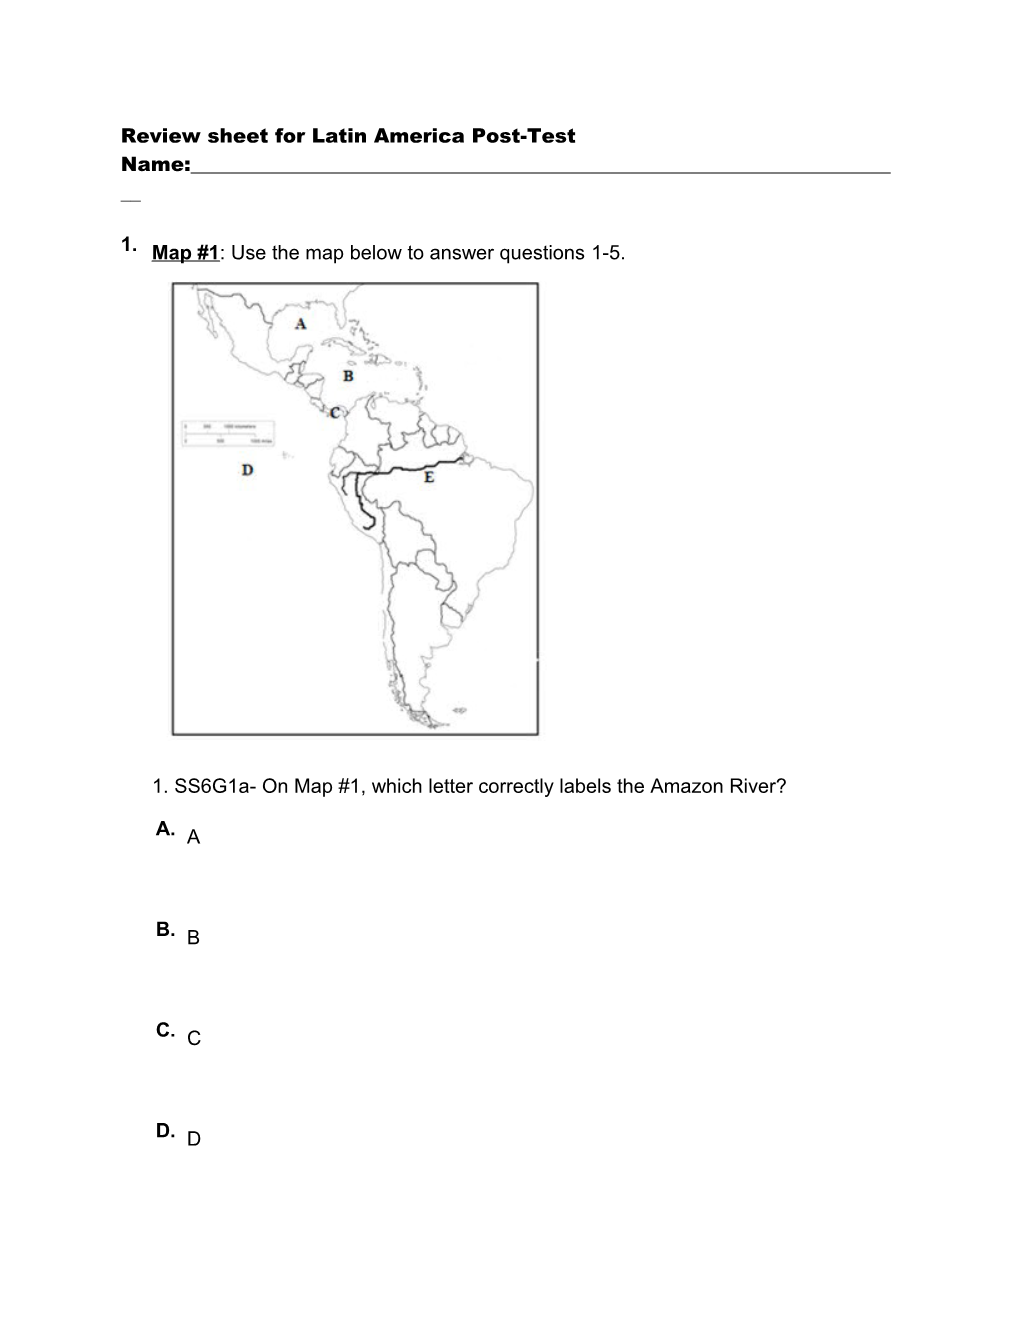 Review Sheet for Latin America Post-Test